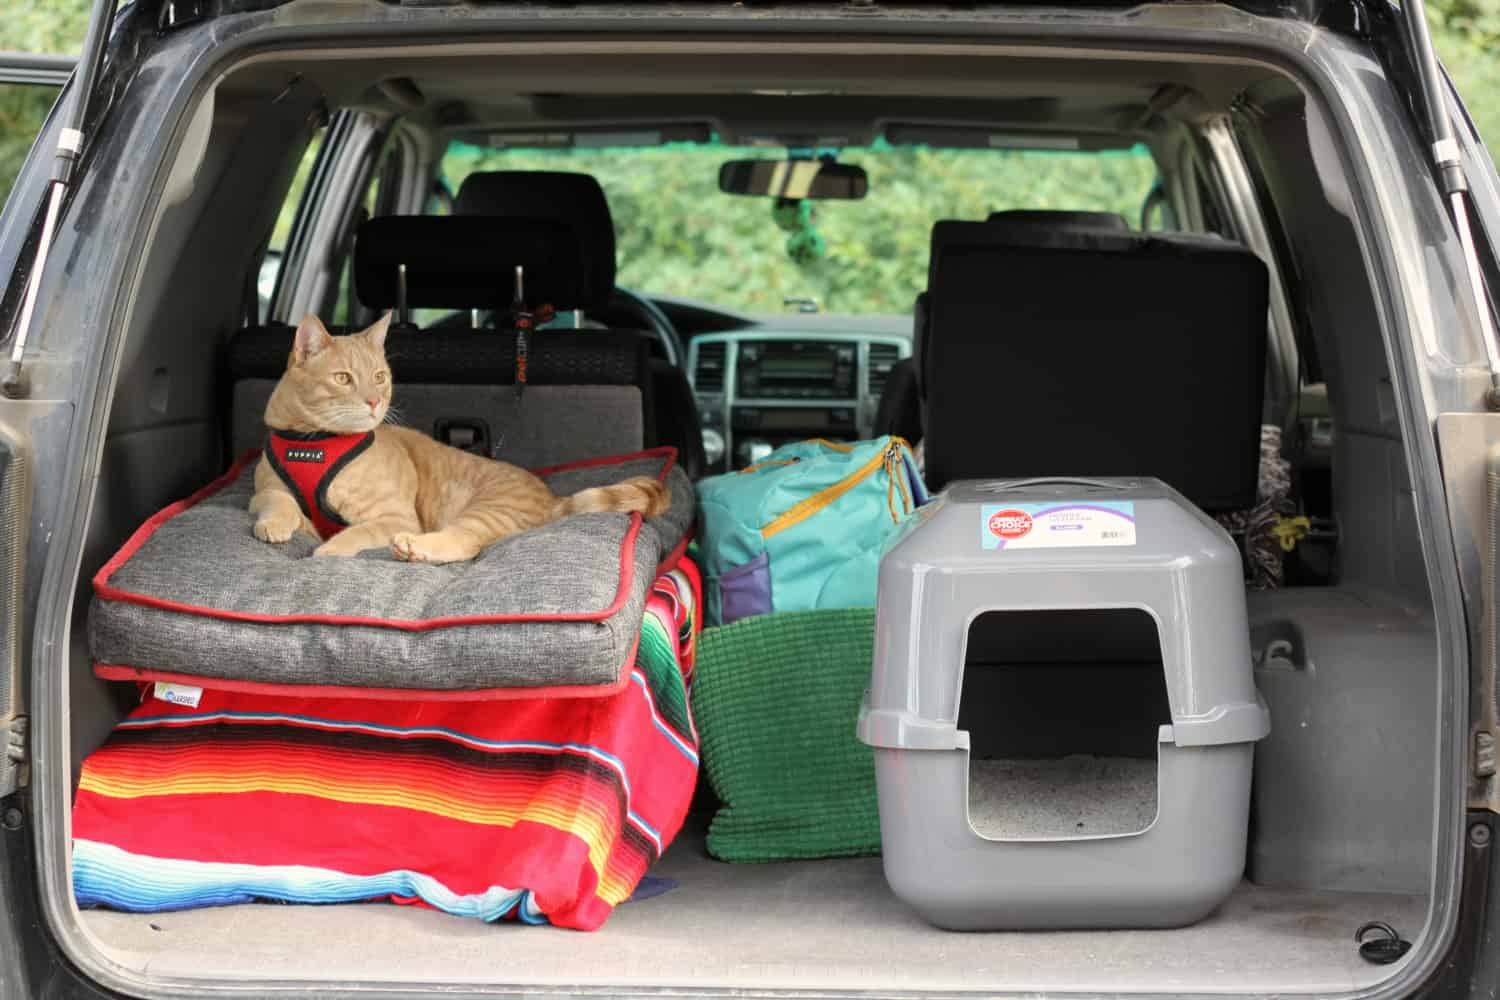 cat tips road trip with cat cat travel your cat tip cat make a cat traveling with a cat in a car taking a cat on a road trip safe foods for cats road trip with cat litter box tips for traveling with a cat cat have cat get cats in a car car trip with cat best cat carrier for road trip litter box tips foods that are safe for cats cats for cars taking your cat on a road trip best food for your cat traveling with your cat cat litter tips find your cat tips for road trips with cats for your cat cat carrier for road trip tips cat tips for getting a cat getting cat in carrier give cat cats and road trips best cat food for your cat cat carrier for car trip cat litter box tips road trip cat carrier taking cats on a road trip cat time cat food the cat the box do you cat tips for traveling with a cat in the car your the cats have you the cat litter box for road trip tips for having a cat foods cat can have cat food tips cat road trip litter box this is your cat give a cat your cat is be your cat give the cat cat cat litter box cat can can taking cat in car food to make for cats you are the best cat best food to give your cat cat in cat carrier your a cat the travel cat make your cat cat carrier for car with litter box the cat cat cat tips to get cat in carrier cats and traveling in cars tips for cat litter box road trip cat litter box taking a cat in the car cat names cat time cat microchip picture cat cat is cat get a cat cat can cat in the cat cat and cat images cat cat help help cat 10 cat cat road cat has if a cat cat trip cat & cat names to name your cat road cat if cat names for your cat a cat can cat on cat get the cat cat likes your kitty cat in cat cat on the road take cat if i was a cat i like your cat cat will kitty tips best products for cats will a cat cat is good cat and the cat microchip your cat get cat microchipped know your cat cats to be microchipped have cat if your cat if you have a cat do cats like road trips do you know cat cat by cat names to give your cat get kitty cat carrier for travel in car your cat name good names to name your cat tips for car travel with cats tips for traveling with cats in a car cat with a cat our cat cat litter best cat tips cat carrier tips cat and can food you can make for your cat kitty litter tips cat names cat take your cat traveling in the car with a cat car trip with a cat tips for cats in cars traveling with a cat tips tips on getting a cat tips for litter box foods you can give your cat do this to your cat litter tips traveling with a cat in car travel cat cat carrier cat tips road trip with cat your cat cat can tip cat traveling with a cat in a car road trip with cat litter box taking a cat on a road trip cat have cat get tips for traveling with a cat litter box tips car trip with cat cat litter tips best cat carrier for road trip taking your cat on a road trip cat carrier for car trip tips for road trips with cats cat carrier for road trip cat litter box tips tips cat tips for getting a cat cats and road trips tips for traveling with a cat in the car litter box for road trip road trip cat carrier cat road trip litter box taking cats on a road trip tips for car travel with cats make your cat tips for having a cat tips for traveling with cats in a car tips to get cat in carrier cats and traveling in cars tips for cat litter box road trip cat litter box traveling in the car with a cat car trip with a cat tips for cats in cars best cat tips cat carrier tips tips on getting a cat tips for litter box litter tips traveling with a cat in car traveling with a cat tips cat a cat traveling with cats in car long distance travel litter box for car get cat best cat carrier for long distance car travel cat carrier for long car trips cat carriers for car travel best cat carriers for car travel best cat carrier for cross country trip long distance travel with cats cat car travel litter box long road trip with cat best cat carrier for long car trips long car trip with cat litter box for car travel cat travel carrier for car long distance cat carrier cat carrier for long distance travel cat carriers for long distance car travel taking my cat on a road trip taking cats on long car journeys tips for taking cats on long car trips best cat carriers for long road trips long distance road trip with cats long car journey with cat cat long car journey best cat carriers for long distance travel cross country road trip with cat long distance travel with cats in car tips for traveling long distance with a cat taking a cat on a long road trip taking a cat on a long car journey cat long distance car trip long trips with cats cats on long road trips long trip with cat long road trip with a cat cat carrier long road trips traveling in car with cats long distance cats on long car journeys best cat carrier for long car travel long distance travel with a cat best cat carrier for car trips prepare cat for road trip traveling long distance with cats in car long car travel with cats the best cat carrier for travel in a car cat carriers for long trips car journey with cat road trip with my cat traveling cross country with a cat in a car travels with my cat travel long distance with cat in car take cat on long car trip travel litter box car traveling by car with a cat long distance road trip with two cats tips to prepare for cat traveling long distance in a car with a cat traveling with your cat in a car taking cats on car trips traveling in the car with cats tips for traveling long distance with cats traveling with cats long distance in car tips for getting cat in carrier long journey cat carrier road trip with cat travel litter box for car your cat traveling with a cat in a car cat can taking a cat on a road trip cat car travel litter box cat carriers for car travel road trip with cat litter box best cat carriers for car travel cat have long road trip with cat cat carrier for long car trips litter box for car travel cat travel carrier for car long car trip with cat car trip with cat best cat carrier for long car trips taking your cat on a road trip cat carrier for car trip best cat carrier for road trip taking my cat on a road trip cat carrier for road trip travel cat cat travel carrier cat animal cat car find my cat cat car carrier can cats travel cat litter box cat driving car cat in car car cats cat is cat pet carriers for cats make a cat cat in the cat cats can best cat carrier for car carrier cat create a cat cat and cat cat cats cat travel box cat trip travel with my cat cat on car does cat cat travel carrier with litter box cats on a car cat road cat and dog road trip cat car carrier with litter box if cat cat animal hospital best cat travel carrier my cat my cat cat has if a cat it is my cat traveling with your cat cars for cats pet your cat feeding your cat cat & cat cat on vacation cat is a animal road cat cats and cars a cat can cat on my car cat on cat best pet carrier for cats teach cat to use litter box cat using litter box take a cat long drive with cat make your own cat cat on the road take cat if i was a cat go to cat find your cat for your cat taking cat to vet traveling with a cat litter box places to take your cat the cat is on the car cats and travel my own cat cat will if my cat the cat is in the car my cat pets me to my cat taking cat on vacation know your cat cat is an animal go to cat cat cat need carrier for 2 cats a cat carrier make your own cat litter trip the dog pet carrier for 2 cats will a cat if your cat there is a cat on my car cats on the road make your own litter box if you have a cat take your cat to the vet day cat and the cat petting your cat will the cat create your own cat cat in a cat cat on the car time travelling cat a cat car your pet cat cat going taking your cat on vacation cat cat car cat visit times to feed cat do you cat best place to pet cat best carriers for cats your the cats cat travel medication dog cat carrier cat does teach cat cat carriers for 2 cats road trip road trip planner the road trip road trip ideas best road trip planner car trip travel tips travel planner things to do on a road trip road trip tips travel plan road trip with dog trip planner map things to take on a road trip best road trip road trip map road trip places road trip map planner trip ideas blog travel car trip planner things to do on a road trip in the car map a trip best trip planner plan your road trip trip places dog friendly road trips road trip with dog planner road trip with friends trip planner road trip things you need for a road trip places to go on a road trip travel tips and tricks best places to road trip a road trip car road trip take a road trip best places to go on a road trip go on a road trip pet friendly road trip planner road trip blog travel planner map going on a road trip trip blog dog friendly road trip planner travel by road travel trip planner best road trip ideas plan a trip for me road trip advice road trip to places to take a road trip best road trip map best travel planner things for a road trip road map planner things to do on a road trip with friends road trip travel map your road trip plan your travel help me plan a trip go pet friendly road trip needs road travel planner road trips to take help me plan a road trip taking dog on road trip road trip travel planner travel tricks help planning a trip road to trip things needed for a road trip road trip from the travel planner trip your plan best places to road trip to on the road trip best places to take a road trip road trip tips and tricks the best road trip best places to road trip with friends plan your trip map best road trips with dogs trip in car plan road help planning a road trip things to do on a car trip on road trip road trip with your dog do a road trip planning a trip with friends pet friendly road trip best things for a road trip best road trip tips i need a road trip best road trip dogs road travel tips best things to do on a road trip best things to take on a road trip best things for road trips best road trip map planner road trip with pets road trip with you road trip road trip tricks and trips plan of travel a travel plan road travelling car road trip planner i plan to travel tips for planning a road trip plan a trip to road trip by car pet friendly trip planner map a trip by car road trips are the best car travel planner car trip ideas car and trips plan a road trip for me travel planning tips things to do in road trip tips for taking dog on road trip best road trips to take road trip with best places to go on road trip things to plan for a trip road trips to go on trips planned for you trip tricks go for a road trip road map for travel traveling on the road places to go on a road trip with friends best places to go on a road trip with friends by road travel road trip car ideas i need help planning a trip road trip help go to road trip best travel map planner road trips to go on with friends road trip travel tips travel with a plan road trip tricks go pet friendly road trip planner places to road trip with friends best dog road trips best dog friendly road trips trip planning tips best tips for road trips car trips with dogs things to take with you on a road trip for a road trip a car of travelers road trips to take with your dog things to take for a road trip trips to plan places to plan a trip best place to plan a trip road trip is car trip tips best road trips to take with your dog road trip car tips places for a road trip plan me a road trip to go on a road trip things to take for road trip dogs and road trips best road trips with your dog road trip with car things needed on a road trip places to go on a road trip to things i need for a road trip need a road trip about your trip about road trip best road trips for dogs tips for taking dogs on road trips travel planner ideas need help planning a trip best places to take a road trip to road trip ideas with friends to plan a trip things to plan for a road trip road trip for dogs road trip things to do in car road travel map trips to plan with friends things to do road trip planner trip on road map planner for trips road trip a road trip trip the travel plan best places to take a road trip with friends things to take in a road trip road trip road friends on a road trip best map for travel planning best road trips from best places to road trip with your dog planning on a trip dog friendly trip planner planning a road trip with a dog road trip ideas with dog places to go to on a road trip places to go in a road trip road trip travellers best road trip advice best trip planning map plan for the trip road trip in a car maps for traveling by car things you need in your car for a road trip help me to plan a trip road trip with pets planner plan your car trip taking a road trip with your dog road trip on travel planner blog travel planner with map things to do in a car road trip roads to travel dog on a road trip tips to plan a trip planning road trip with dog road trips to take with friends trip road trip road trip to do planner road best places to do a road trip travel by plan travel plan it for road trip best car trip planner planning to go travelling trips that are planned for you things to take in the car on a road trip road trip travel blog by road trip travel planning help plan your road trip map best friend road trips tips and tricks travel plan trip to road trip me tips for going on a road trip pet trip planner things to do for a road trip the best trip planner best car trip road trip planner with pets take a road trip to planning a trip tips dog friendly road trip ideas home to go pet friendly road trip it trip planner ideas road trip with me planning a road trip with friends trip planning ideas trip it travel planner things to take on a car trip need help planning a road trip best road trip roads things to do on your road trip i need to plan a trip trip trip planner on the road road trip in need of a road trip friend road trip ideas tips and tricks for road trips tips for taking a road trip plan trip on a map traveling with cats in car long distance travel cat cat carrier cat car cat car carrier best cat carrier for car road trip with cat travel litter box for car traveling with a cat in a car travel cat carrier travel cat litter box moving with cats best cat carrier for long distance car travel cat travel cage your cat cat travel box cat carriers for car travel best cat carriers for car travel get cat cat car carrier with litter box cat car travel litter box traveling long distance with a cat long car rides with cats road trip with cat litter box cat carrier for long car trips traveling litter box taking a cat on a road trip long road trip with cat cat trip litter box for car travel cat travel carrier for car cat and dog road trip cat cage for car cats and car rides long distance cat carrier moving with cats in car best cat carrier for long car trips moving long distance with cats best cat travel carrier car trip with cat cat carriers for long distance car travel best cat carrier for road trip car safe cat carrier car for cats long car trip with cat cat carrier for car trip cat carrier for long distance travel cat car ride cats and long car rides taking your cat on a road trip taking cats on long car rides car cat litter box best cat harness for car travel cat carrier for road trip best cat carriers for long road trips best cat carriers for long distance travel cat carrier for car rides best long distance cat carrier cats on car rides best pet carrier for car travel cat harness for car travel long distance road trip with cats road trip cat carrier moving with a cat in a car cat car travel cage cats and road trips cat cage for car travel long distance travel with cats in car carrier for cats in car taking cats on a road trip cats and traveling in cars cat litter for travel best cat carrier for long car travel taking a cat on a long road trip the best cat carrier for travel in a car taking cat in car cat car travel carrier with litter box car carrier cat best cat carrier for car trips cat carriers for long car rides litter box for road trip cat long distance car trip taking cats on car rides long trips with cats cat carrier for long road trips cats on long road trips long trip with cat long road trip with a cat cat road trip litter box traveling long distance with cats in car cat litter travel long car travel with cats cat long distance travel cage road trip with cat and dog traveling in car with cats long distance cat carriers for long trips long distance car ride with cats safe cat carrier for car taking cats in the car long distance travel with a cat road trip cat litter box taking a cat in the car dog and cat road trip travel long distance with cat in car taking a cat on a long car ride long car ride with a cat traveling in the car with a cat moving cats long distance car car trip with a cat travel litter box car traveling by car with a cat long distance traveling with a cat in car traveling long distance in a car with a cat cat car ride on cat dog road trip take cat on long car trip traveling with cats long distance in car traveling with your cat in a car taking cats on car trips traveling in the car with cats road trip the road trip road trip podcasts go on a road trip go trips going on a road trip a road trip road trip journal road trip video on a road trip road trip to trips to go go on trips road to trip road trip from on the road trip on road trip podcasts for a road trip road trip company trip on the road road trip in road trip road trip go for a road trip go to road trip podcasts for road trip road trip with road trips to go on to go on a road trip road and trip podcasts about road trips road the trip road a trip road trip is road trip business about road trip trip on road road trip a road trip trip road trip road road trip on road trip i trip road trip for road trip road trip pro by road trip cat backpack cat tips travel cat cat leashes road trip with cat your cat cat travel backpack shop cat travel cat harness harness cat your cat backpack best cat backpacks cat you cat road the traveler cat backpack cat trip road cat cat backpack travel cat on the road for your cat cat harness backpack cat going know your cat backpack for your cat cat and you best cat travel backpack travel with your cat travel cat shop tips for road trips with cats backpack with cat this is your cat your cat is be your cat cat backpack with harness your a cat cats and road trips should cat cat harness with backpack cat harness on cat going cat cat in cat backpack cat travel pack the backpack cat cat travel back pack get your cat your cat backpack harness your cat back pack cat harness and backpack and your cat a backpack for your cat backpacking with your cat travel cat cat tips road trip with cat your cat shop cat cat you cat trip travel cat shop tips for road trips with cats cat and you cats and road trips travel litter box traveling with cats in car long distance cat travel carrier cat travel bag cat car carrier best cat carrier travel litter box for car traveling with a cat in a car things to know before getting a cat travel cat litter box best cat carrier for car best cat carrier for long distance car travel cat carrier with litter box things to know about cats you are a cat cat travel box things you need for a cat get cat cat car carrier with litter box tips for traveling with a cat taking a cat on a road trip cat car travel litter box traveling long distance with a cat cat carriers for car travel you are cat road trip with cat litter box best cat carriers for car travel cat carrier for long car trips cat travel carrier with litter box long road trip with cat things cats need litter box for car travel cat travel carrier for car cat on vacation you can do it cat long distance cat carrier travel litter traveling with your cat best cat travel carrier long car trip with cat car trip with cat travel cat litter best cat carrier for road trip a cat carrier best cat carrier for long car trips traveling with a cat litter box car cat litter box cat carrier for car trip cat carriers for long distance car travel cat for you best travel litter box taking cat on vacation cat carrier for long distance travel things you need to know before getting a cat cat travel bag with litter box cat need taking your cat on a road trip the best cat carrier do cats need road trip with cat advice cat carrier for road trip things you need for cats long distance road trip with cats best cat carriers for long distance travel things you need to know about cats tips for taking cats on long car trips best long distance cat carrier tips for traveling with a cat in the car things to do before getting a cat things i need for a cat things you need before getting a cat long distance travel with cats in car best cat carriers for long road trips cats and travel cat litter for travel long distance cat carrier with litter box things needed for cat taking cat in car road trip cat carrier tips for traveling long distance with a cat best cat litter box for travel before you get a cat tips for getting a cat taking your cat on vacation do you cat things you need for your cat you are the cat best travel bag for cats the travel cat travel carrier for cat with litter box litter box for road trip cat long distance car trip do you know cat carrier for cats in car things to know before you get a cat places you can take your cat taking cats on a road trip traveling long distance with cats in car cats to you cats and traveling in cars cat carrier long road trips taking cats in the car long car travel with cats best cat carrier for long car travel taking a cat on a long road trip you need a cat the best cat carrier for travel in a car best travel cat litter box you are the best cat cat with you cat things to know car carrier cat best cat carrier for car trips you are the cats taking a cat in the car best cat for traveling long trips with cats cats on long road trips long trip with cat tips for car travel with cats litter travel long road trip with a cat cat road trip litter box travel for cats best cat travel bag best cat litter for travel tips for traveling with cats in a car do cats know you best cat for you things to know about a cat things to know about getting a cat cat things you need long travel with cat cat tips road trip with cat travel cat your cat traveling with a cat in a car get cat taking a cat on a road trip tips for traveling with a cat cat trip traveling with your cat car trip with cat taking your cat on a road trip tips for road trips with cats tips for getting a cat do you cat tips for traveling with a cat in the car taking your cat on vacation cats and road trips tips for car travel with cats taking cats on a road trip cats and traveling in cars tips for traveling with cats in a car taking cat in car the travel cat taking a cat in the car travel for cats cat adoption cat car cat shelter cat home cat care cat dogs cat in car find my cat cat care tips cat cars petfinder cat cat can taking care of a cat cat cats tip cat cat on car help cat if a cat cat road cat search videos for your cat cat and dog road trip bringing a cat home cats and car rides my cat my cat cat has cat videos for your cat car and dog cat have my home cat pet your cat cat get cats on a car go to cat travel with my cat road cat if cat cat find adopting a cat tips it is my cat pet and cat cat on the road cat vacation care car for cats if i was a cat for your cat cat will cat on my car if my cat cat and car give cat to my cat find a home for my cat go to cat cat taking my cat on a road trip if your cat cat car ride tips find your cat help my cat petting your cat cats on car rides cat on the car tips cat pet adoption cats cat going car rides with cats animal shelter cat adoption your the cats caring for your cat this is your cat your cat is be your cat if you have a cat a cat car cat for a car for cats video your pet cat cat cat car pet for cat take my cat have you the cat car to cat tips for having a cat my cat i give a cat a home getting a dog with a cat cat is a pet getting a cat with a dog bringing a cat home to a dog give a cat give the cat cat can can my cat home road trip with cat and dog take care of your cat cat riding car get my cat my cat a getting a cat for my dog your a cat pet cat care tips i my cat the cat cat cat cat pet tips bringing your cat on vacation tips for cats in cars pet of cat cat of car a cat in a car tips for taking care of a cat dog and cat road trip taking cats on car rides take your cat traveling in the car with a cat pet and the cat car trip with a cat car for a cat pet shelter cat road trip with my cat tips for taking care of cats cat to car tips on getting a cat give your cat for adoption do this to your cat cat dog road trip traveling with a cat in car traveling with a cat tips traveling with your cat in a car taking cats on car trips traveling in the car with cats adopting a cat from a shelter tips cat tips road trip with cat your cat cat can tip cat traveling with a cat in a car taking a cat on a road trip help cat cat road tips for traveling with a cat cat has if a cat cat have cat trip cat get road cat if cat car trip with cat cat on the road if i was a cat taking your cat on a road trip cat will traveling with your cat find your cat tips for road trips with cats for your cat tips cat tips for getting a cat give cat cats and road trips if your cat if you have a cat taking cats on a road trip do you cat tips for traveling with a cat in the car your the cats have you the cat tips for having a cat this is your cat give a cat your cat is be your cat give the cat cat can can taking cat in car your a cat the travel cat tips for car travel with cats the cat cat cat tips for traveling with cats in a car cats and traveling in cars taking a cat in the car take your cat traveling in the car with a cat car trip with a cat tips for cats in cars traveling with a cat tips tips on getting a cat do this to your cat traveling with a cat in car cat names cat time cat microchip picture cat cat is cat cat travel get a cat cat in the cat cat and cat images cat cat help make a cat 10 cat safe foods for cats road trip with cat litter box cat & cat names to name your cat names for your cat a cat can cat on cat get the cat cats in a car cat likes your kitty cat in cat best cat carrier for road trip litter box tips take cat foods that are safe for cats cats for cars i like your cat best food for your cat cat litter tips kitty tips best products for cats will a cat cat is good cat and the cat microchip your cat cat carrier for road trip getting cat in carrier get cat microchipped know your cat cats to be microchipped best cat food for your cat have cat cat carrier for car trip do cats like road trips cat litter box tips road trip cat carrier cat time cat food the cat the box litter box for road trip do you know cat foods cat can have cat food tips cat by cat cat road trip litter box names to give your cat cat cat litter box get kitty cat carrier for travel in car your cat name food to make for cats you are the best cat best food to give your cat cat in cat carrier good names to name your cat make your cat cat carrier for car with litter box cat with a cat our cat cat litter best cat tips cat carrier tips cat and can tips to get cat in carrier tips for cat litter box food you can make for your cat road trip cat litter box kitty litter tips cat names cat tips for litter box foods you can give your cat litter tips travel cat cat carrier cat tips best cat road trip with cat traveling with cats in car long distance find my cat relax my cat anxious cat cat travel your cat calm cat create a cat tip cat my cat is my best friend travel litter box for car best way to pet a cat make a cat traveling with a cat in a car get cat things to do with your cat cat guide cat safety cat down best cat carrier for long distance car travel safe foods for cats taking a cat on a road trip long car rides with cats road trip with cat litter box cat have cat carrier for long car trips cat carriers for car travel best cat carriers for car travel calm cats down best way to prepare for cat cat get tips for traveling with a cat long distance travel with cats travel with my cat cat and dog road trip cat car travel litter box long road trip with cat my cat my cat cat times it is my cat cats in a car calm my cat cat using litter box pet your cat list cat keeping a cat litter box tips best cat carrier for long car trips go to cat foods that are safe for cats cats for cars cat with down cats and car rides long car trip with cat ways to pet your cat best food for your cat my cat is anxious cat on my car car trip with cat traveling with your cat my cat pets me cat litter tips best cat carrier for road trip litter box for car travel cat travel carrier for car get cat to use litter box cats and long car rides go to cat cat getting cat used to harness taking your cat on a road trip help me find my cat long distance cat carrier things to make for your cat things to get your cat taking cats on long car rides keep calm cat cat food go find your cat best way to get cat in carrier for your cat petting your cat taking your cat camping cat carrier for long distance travel ways to calm a cat cat in hotel cat going calming cats for travel getting cat in carrier cat carriers for long distance car travel calm your cat cat use to get food give cat cat road trip essentials to my cat cats riding in cars things to get for your cat taking my cat on a road trip getting a cat used to a harness relax your cat camping with your cat taking cats on long car journeys things to do with my cat tips for taking cats on long car trips tips for road trips with cats giving cat food to dogs best cat food for your cat best way to calm a cat road trip with cat advice cat carrier for road trip cat car ride tips things for your cat best cat carriers for long road trips things to make for cats cat carrier for car trip long distance cat carrier with litter box giving dogs cat food keep the cat help my cat things your cat needs my friends cat long distance road trip with cats best way to get a cat cat litter box tips my cat hotel relax cats giving dog food to cats long car journey with cat cat time cat food your pet cat tips cat get me a cat best way to travel with a cat in a car tips for getting a cat the cat the box tips for long car rides with cats do you cat things you need for your cat my cat friend keep cat calm in car best way to pet your cat cat long car journey best cat carriers for long distance travel cats and road trips your the cats take my cat have you the cat cat on the way calm my cat down long distance travel with cats in car my cat i cat carrier for car rides foods cat can have best way to road trip with cats getting a dog with a cat road trip cat carrier cats on car rides calming an anxious cat taking cats on a road trip getting a cat with a dog this is your cat my best friend is my cat make cat use litter box calming cat carrier your cat is give a cat be your cat give the cat best ways to travel with a cat calm cat carrier cat cat litter box taking a cat on a long road trip cat harness for car travel cat can can things to do to your cat taking cat in car food to make for cats best way to travel with cats in a car you are the best cat getting a dog used to a cat create your cat relaxant for cats taking a cat on a long car journey calm your cat down getting dogs used to cats my cat a litter box for road trip getting a cat for my dog cat long distance car trip things that calm cats down best food to give your cat calm cat in car cat in cat carrier getting cats used to dogs cats on long road trips long trip with cat your a cat the travel cat make your cat tips for traveling with a cat in the car ways to calm your cat ways to calm down a cat my cat needs a friend best way to travel with cats long distance cat carrier for car with litter box my cats are my best friends long road trip with a cat foods i can give my cat i my cat cat road trip litter box the cat cat cat ways to find your cat tips for having a cat getting your cat used to a harness cat carrier long road trips keeping cat as a pet cat food tips keep calm and cat road trip with cat and dog get cat used to carrier cat safety tips tips for traveling long distance with a cat tips to get cat in carrier cats and traveling in cars long distance car ride with cats cats on long car journeys things you can do with your cat tips for cat litter box best cat carrier for long car travel tips for cats on long car rides calming for cats travel cat harness tips long distance travel with a cat best cat carrier for car trips road trip cat litter box taking a cat in the car road trip with cat litter box how to transport a cat by car long distance road trip with cat reddit traveling with a cat in a car how to travel with 2 cats in a car long distance traveling with a cat on a plane traveling with a cat internationally 20 hour car ride with cat